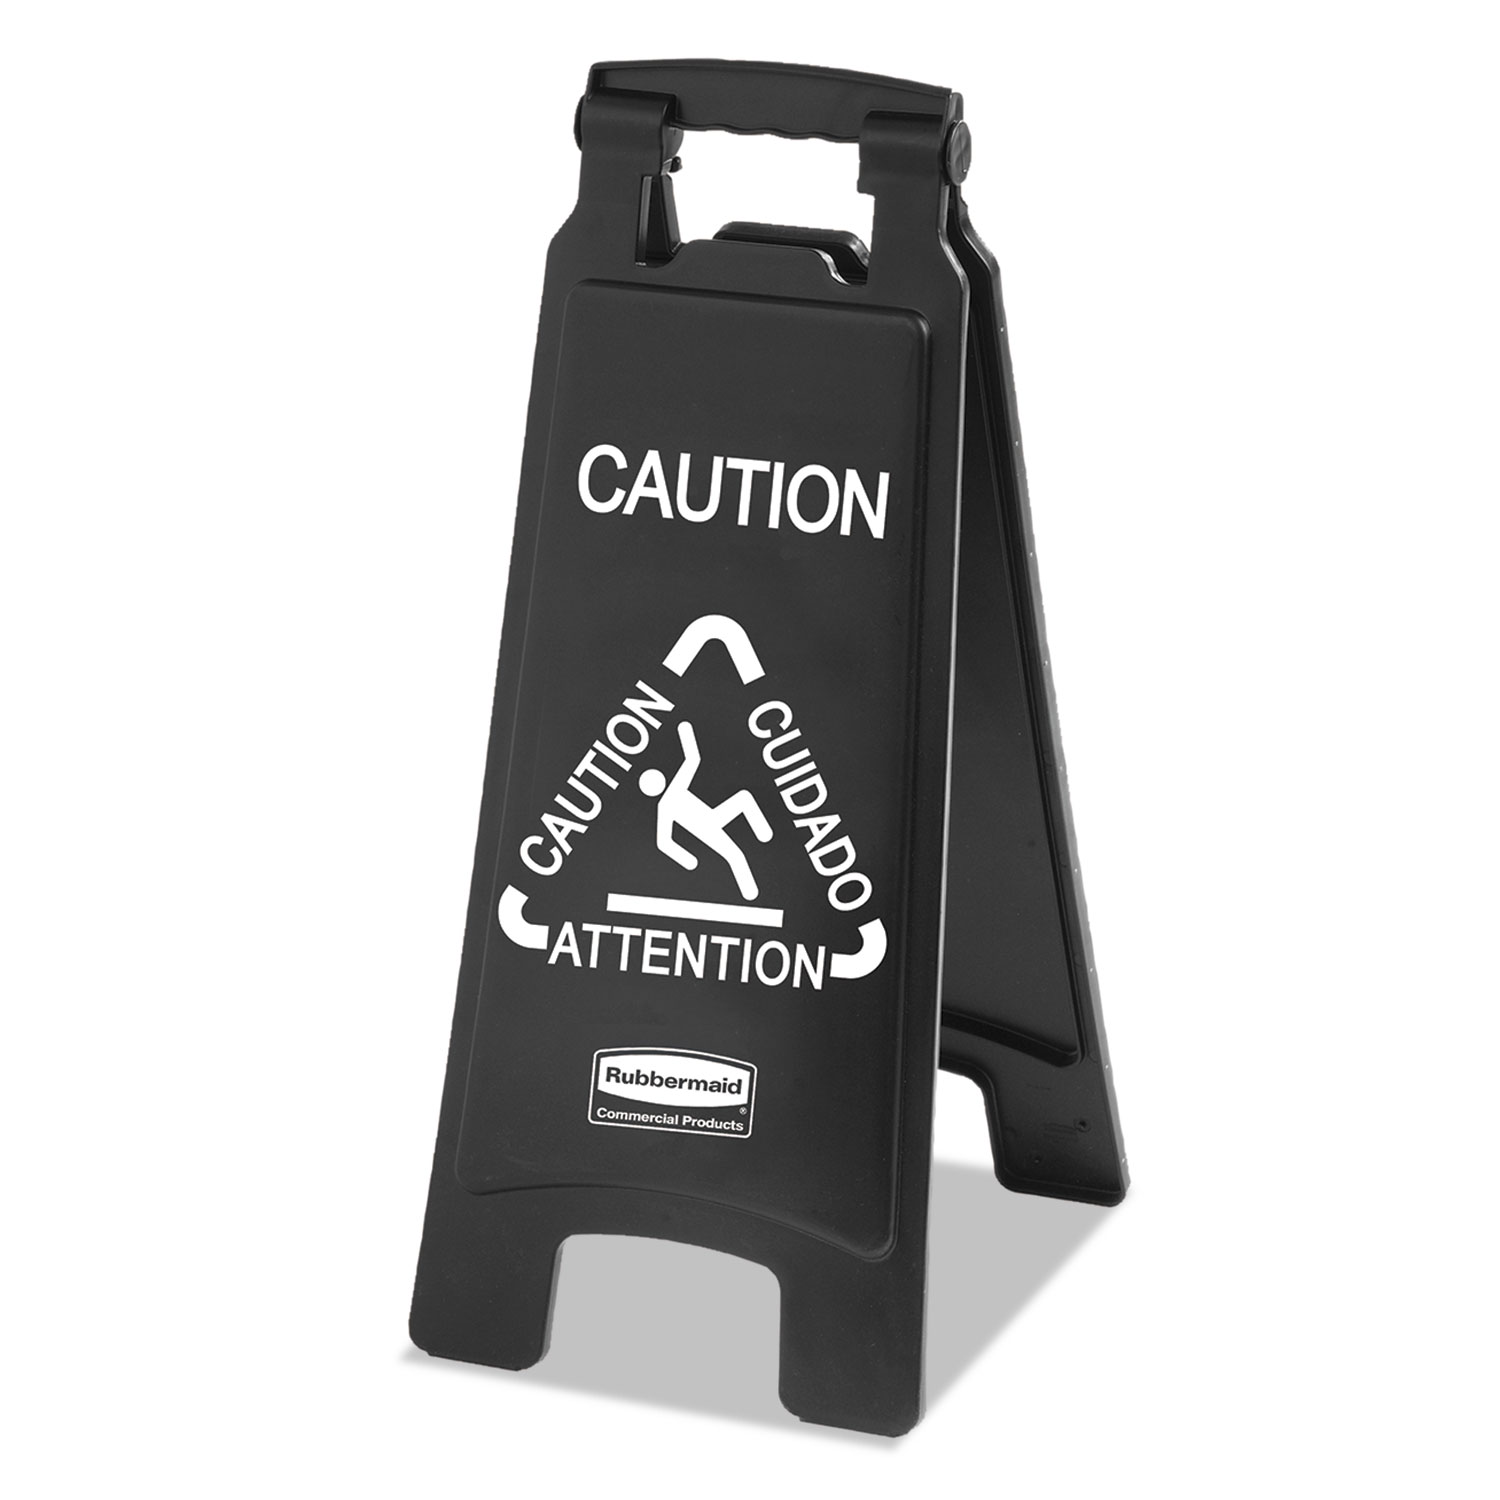  Rubbermaid Commercial 1867505 Executive 2-Sided Multi-Lingual Caution Sign, Black/White, 10 9/10 x 26 1/10 (RCP1867505) 